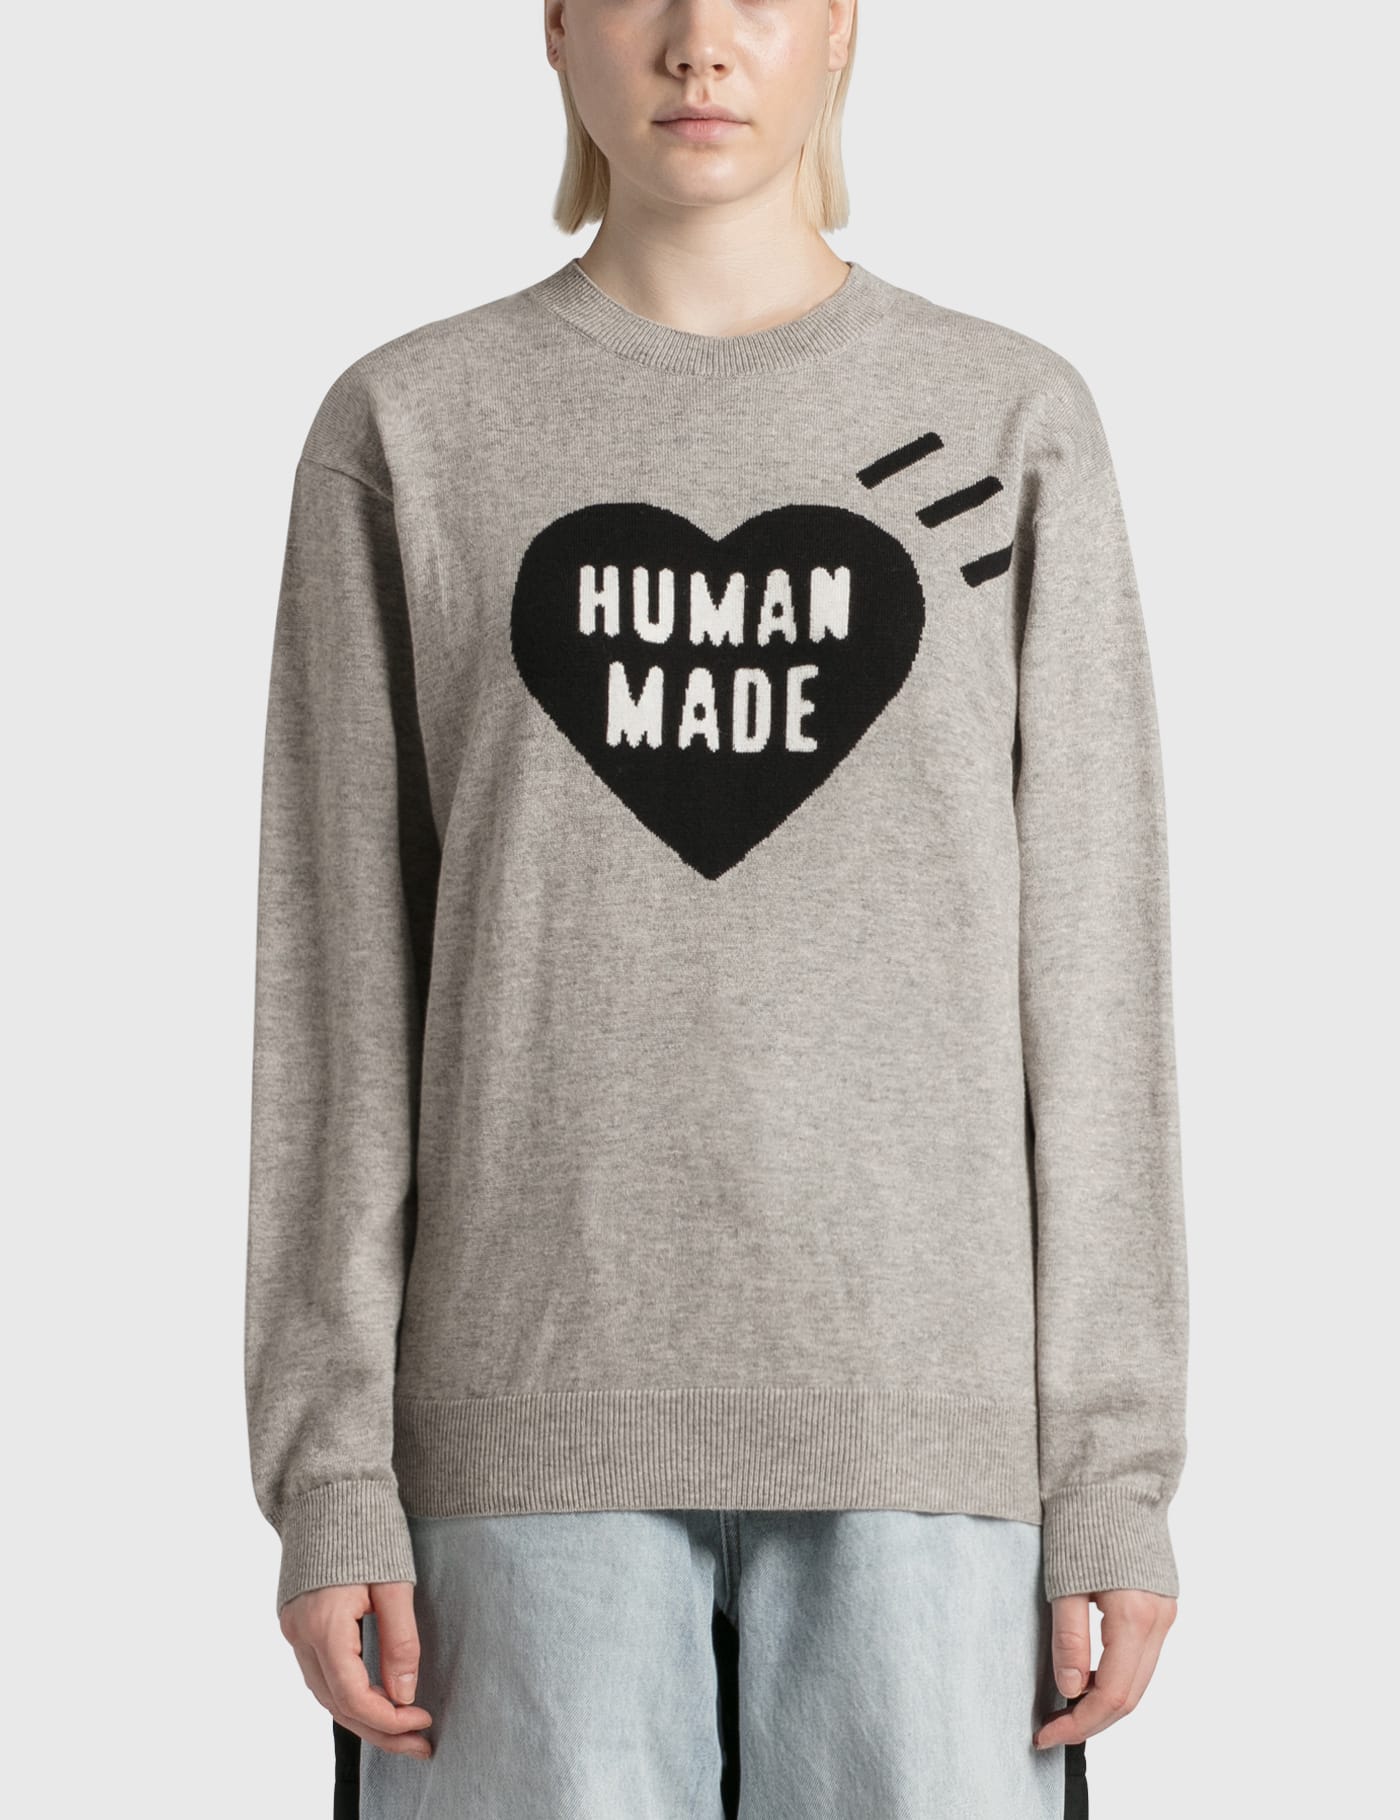 Human Made - Heart Knit Sweater | HBX - Globally Curated Fashion and  Lifestyle by Hypebeast